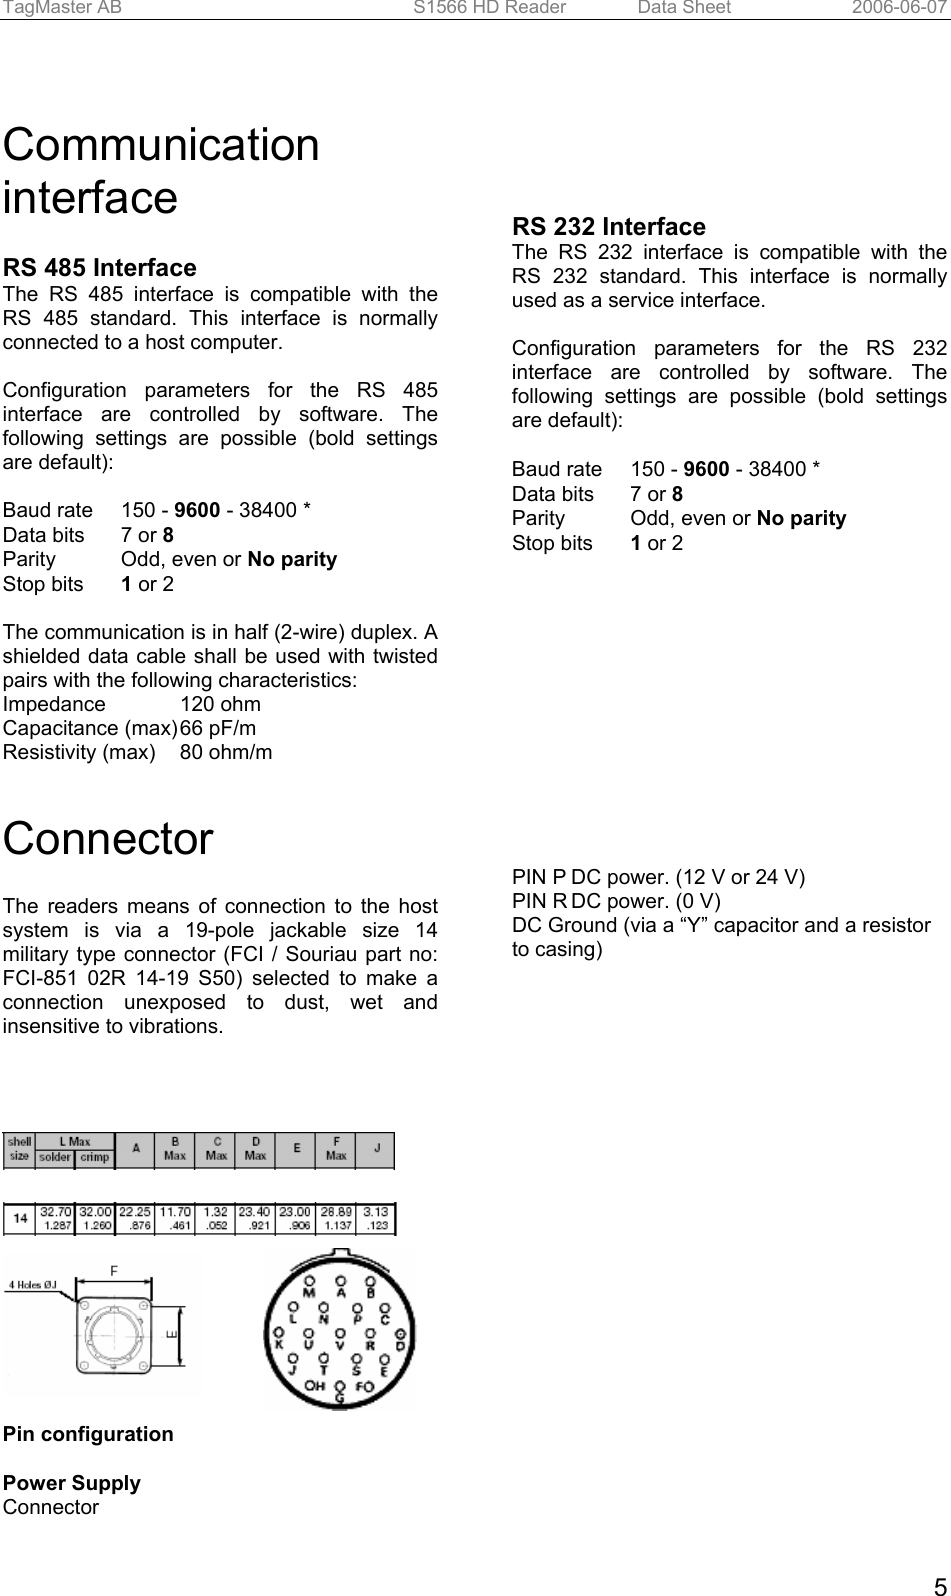 TagMaster AB  S1566 HD Reader   Data Sheet  2006-06-07  5  Communication interface  RS 485 Interface The RS 485 interface is compatible with the RS 485 standard. This interface is normally connected to a host computer.  Configuration parameters for the RS 485 interface are controlled by software. The following settings are possible (bold settings are default):  Baud rate   150 - 9600 - 38400 * Data bits   7 or 8 Parity   Odd, even or No parity Stop bits   1 or 2  The communication is in half (2-wire) duplex. A shielded data cable shall be used with twisted pairs with the following characteristics: Impedance     120 ohm Capacitance (max) 66 pF/m Resistivity (max)  80 ohm/m      RS 232 Interface The RS 232 interface is compatible with the RS 232 standard. This interface is normally used as a service interface.  Configuration parameters for the RS 232 interface are controlled by software. The following settings are possible (bold settings are default):  Baud rate   150 - 9600 - 38400 * Data bits   7 or 8 Parity   Odd, even or No parity Stop bits   1 or 2   Connector The readers means of connection to the host system is via a 19-pole jackable size 14 military type connector (FCI / Souriau part no: FCI-851 02R 14-19 S50) selected to make a connection unexposed to dust, wet and insensitive to vibrations.                 Pin configuration  Power Supply  Connector    PIN P DC power. (12 V or 24 V) PIN R DC power. (0 V) DC Ground (via a “Y” capacitor and a resistor to casing)